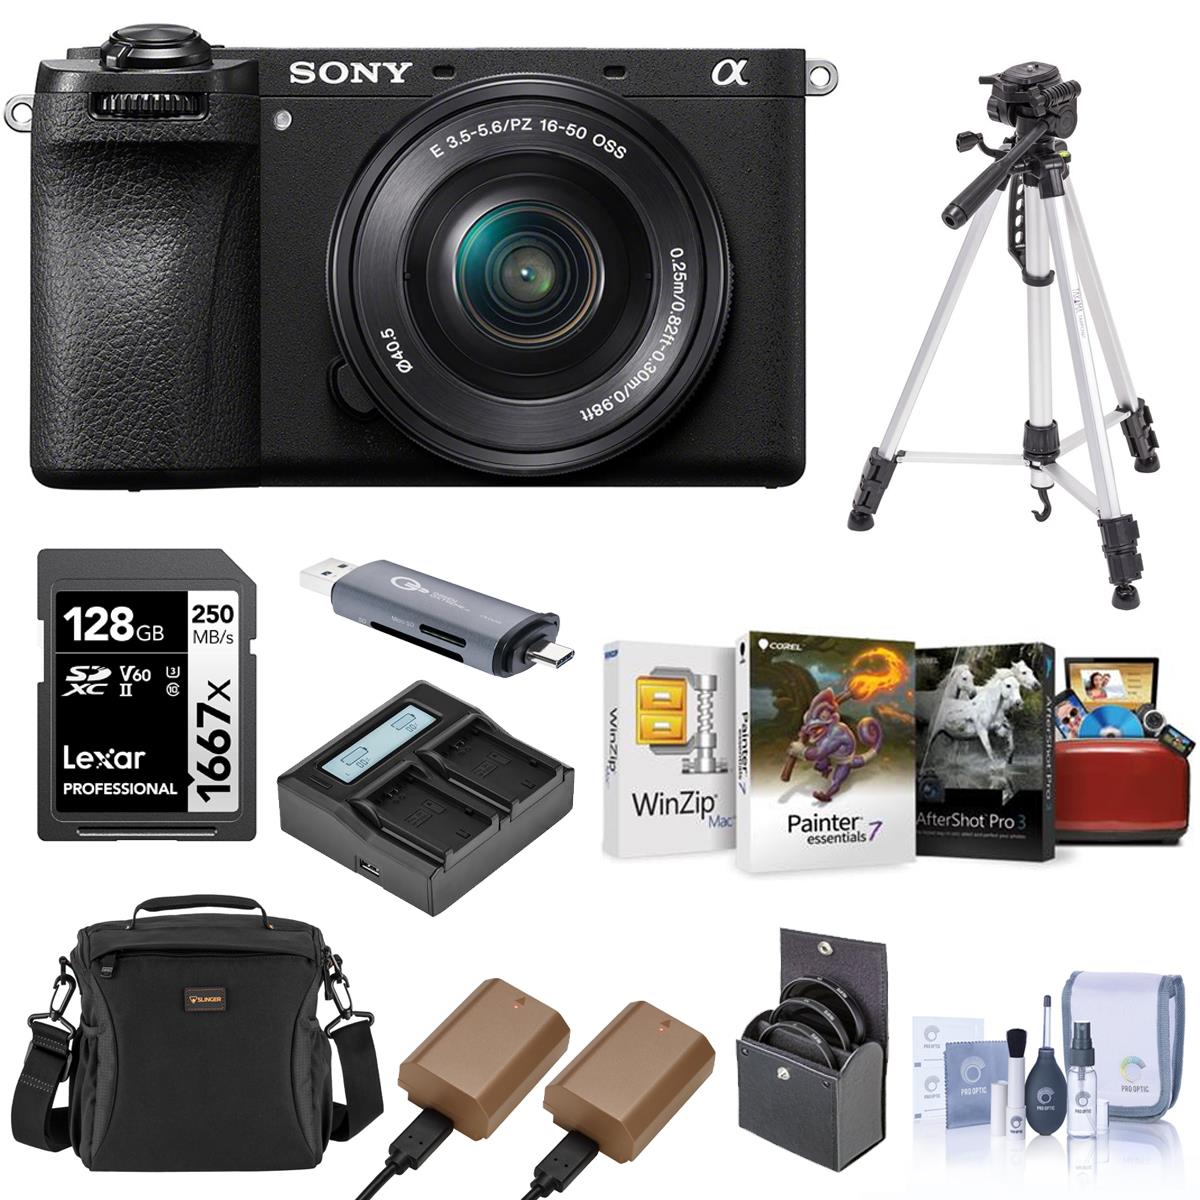 Image of Sony Alpha a6700 Camera with E PZ 16-50mm f/3.5-5.6 OSS Lens and Accessory Kit